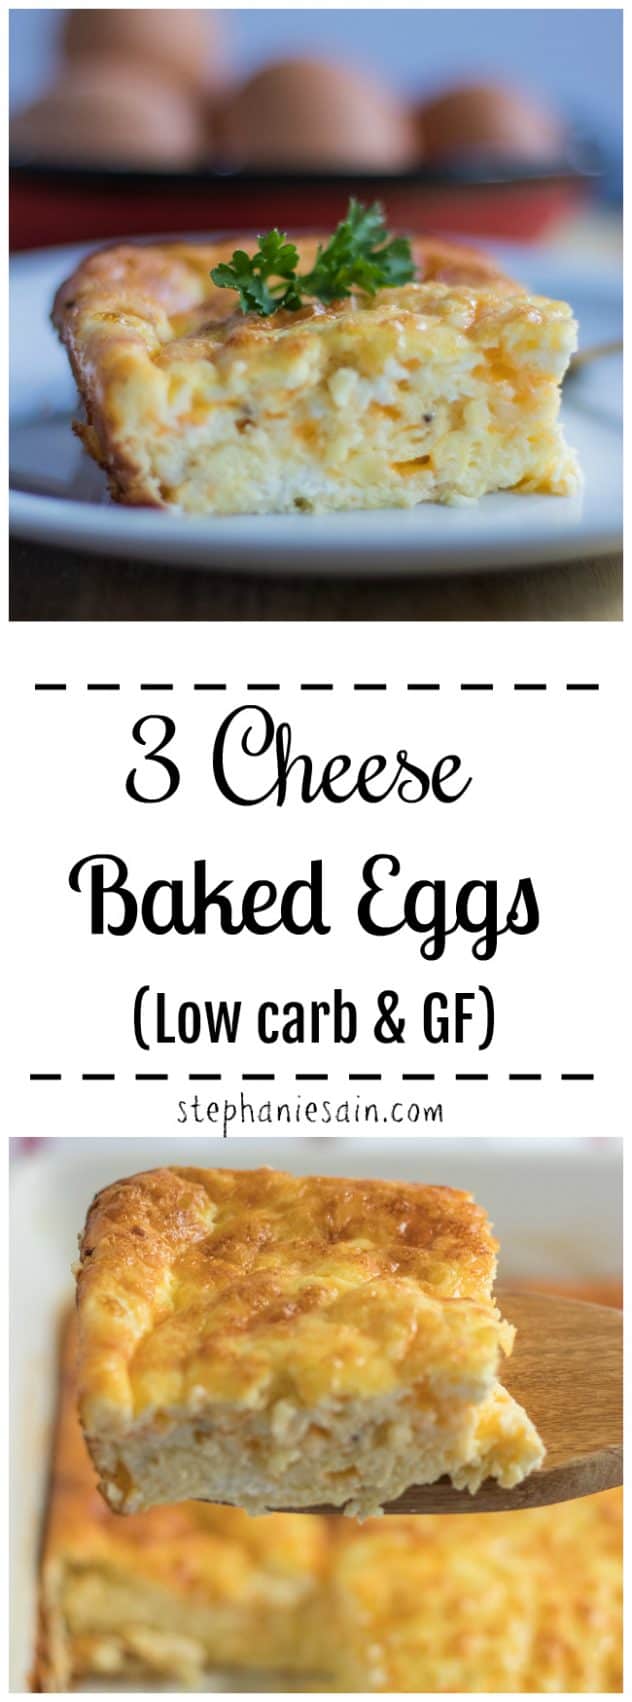 These 3 Cheese Baked Eggs are fluffy, light, super creamy & delicious. Great for breakfast, brunch, or dinner. The perfect way to feed a group of people without standing over the stove. Low Carb & Gluten Free.